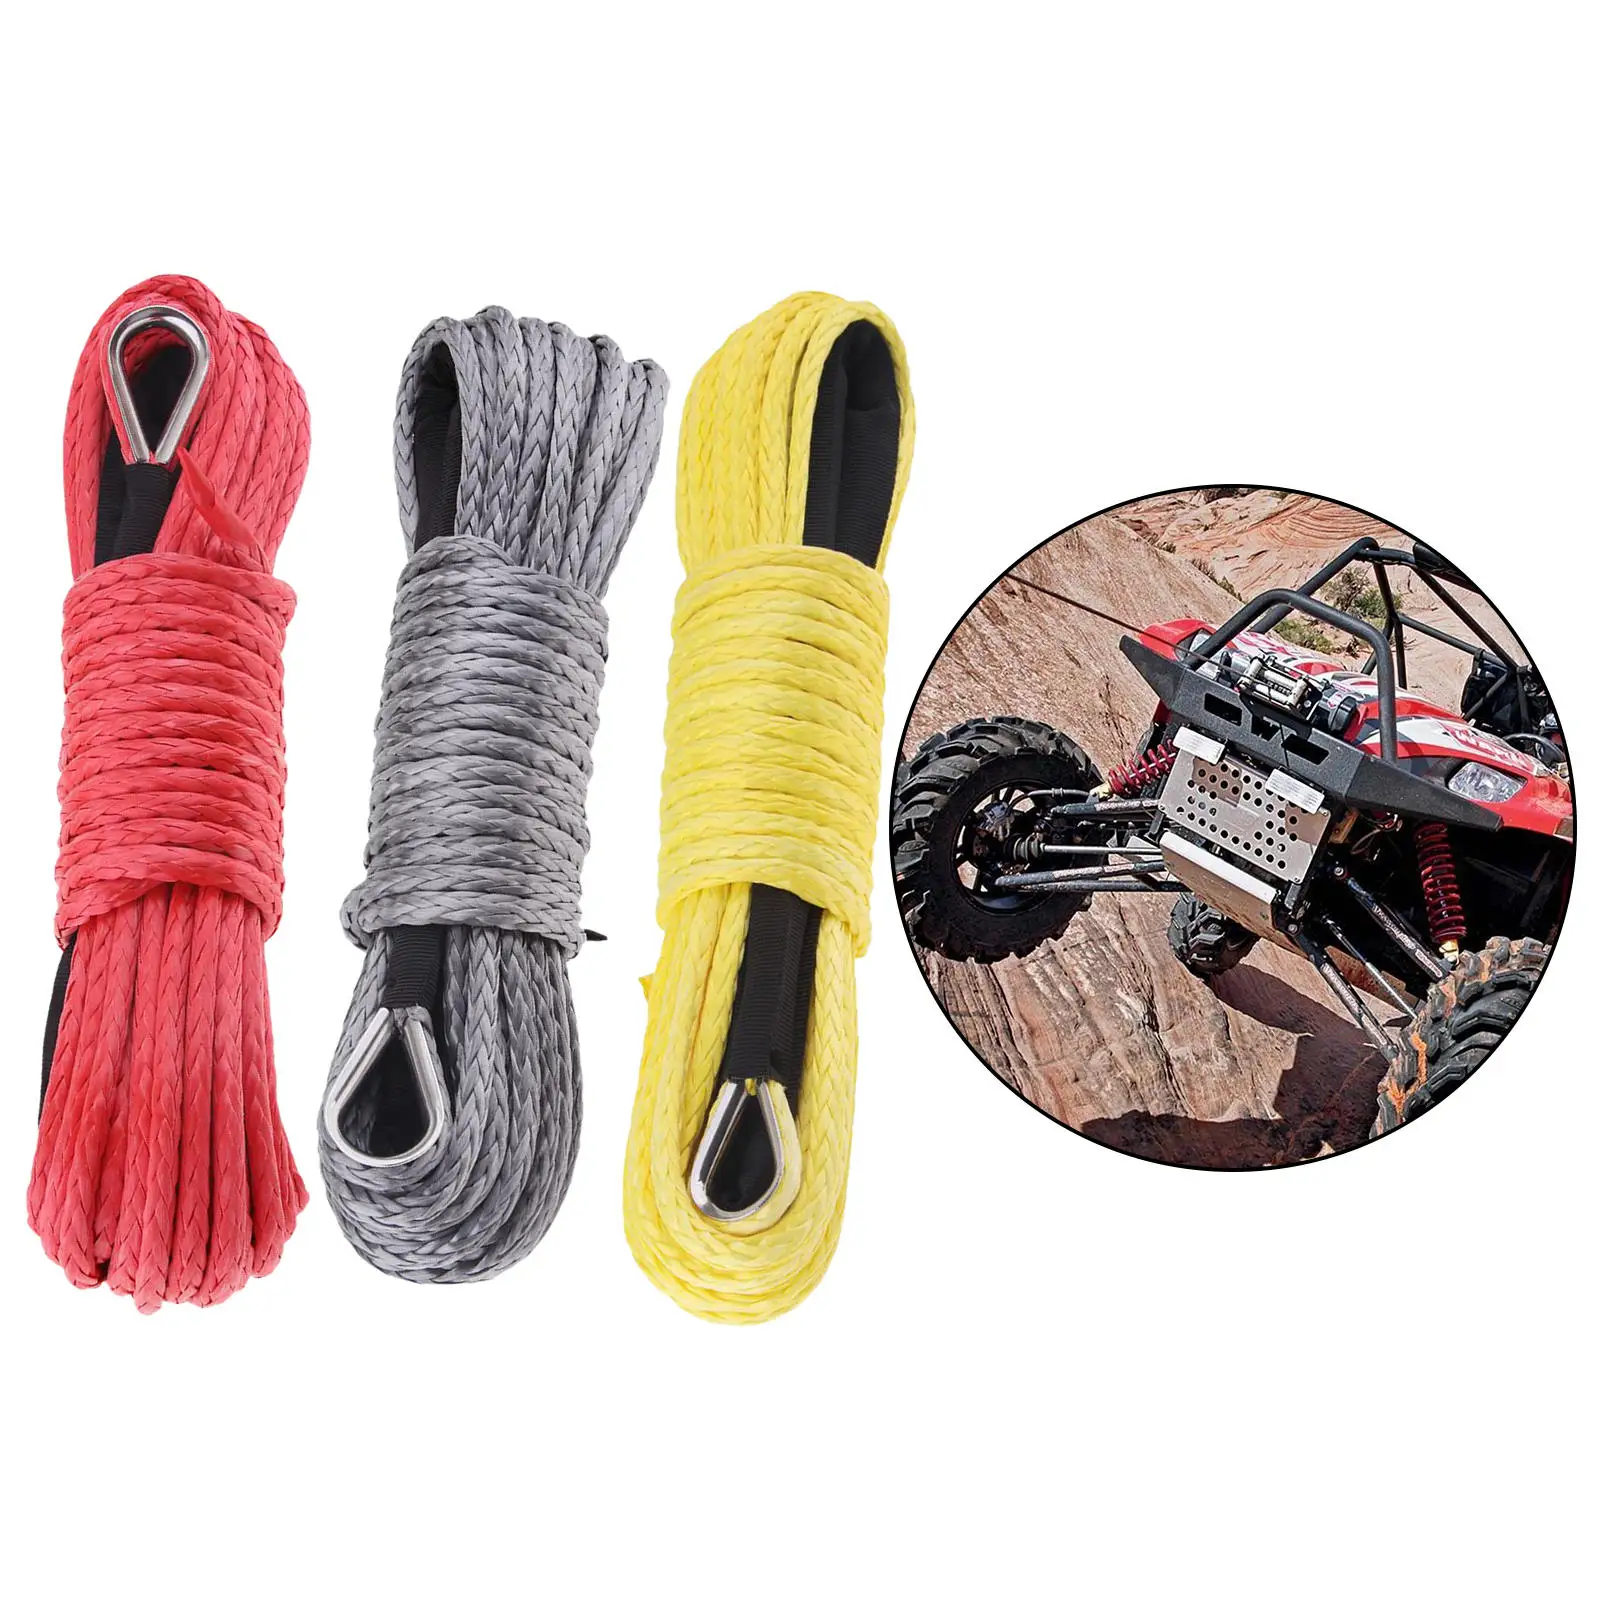 6mm x 15m 7700LBs Synthetic Fiber Winch Line Cable Rope w/ Protecing Sleeve for ATV UTV